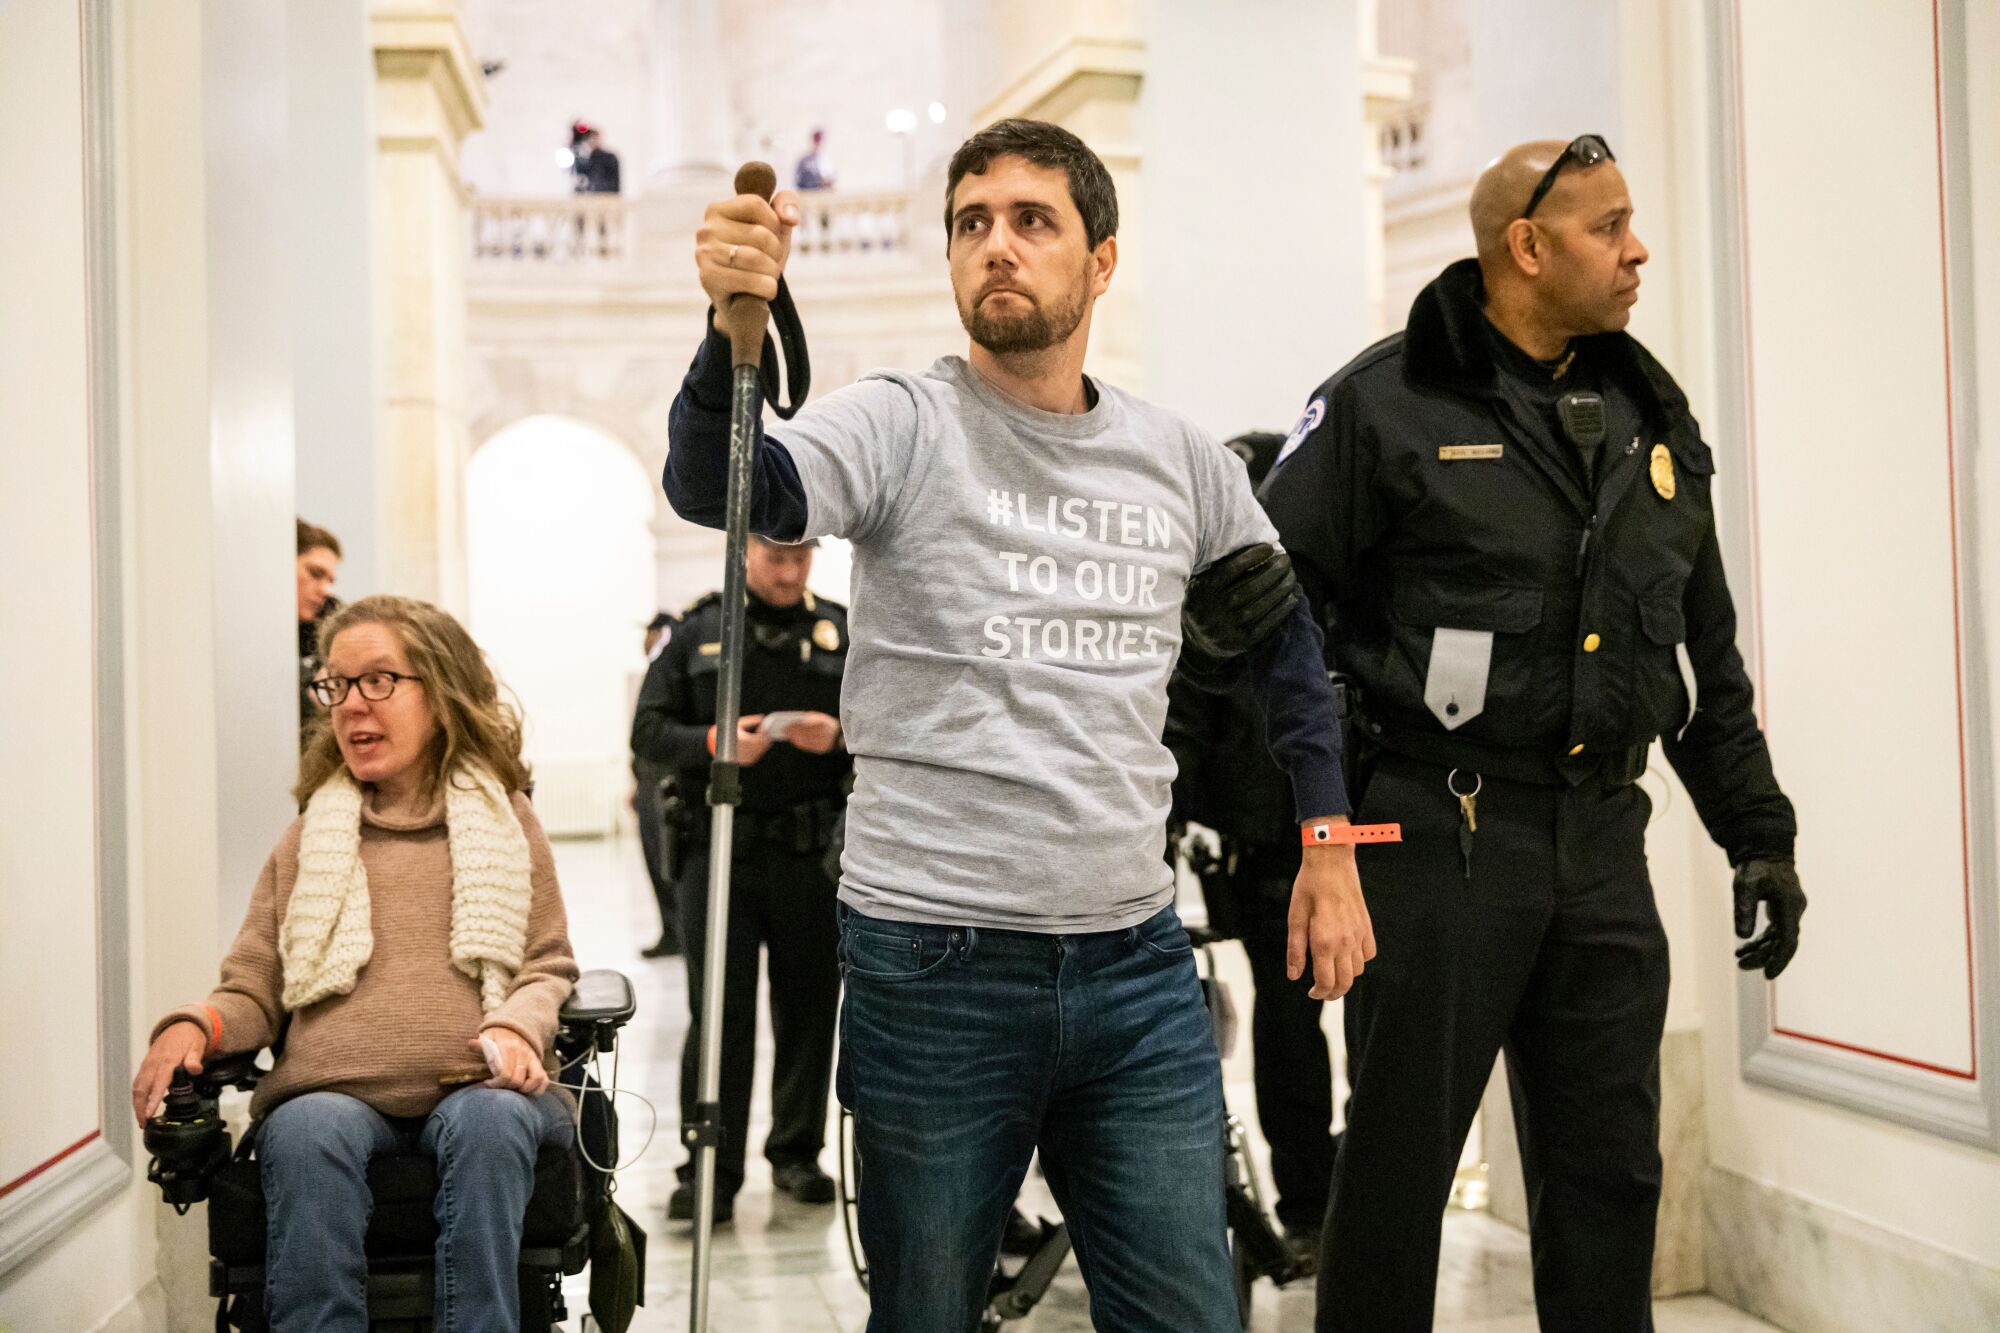 A woman in a wheelchair, a man walking with a hiking pole and several security officers.